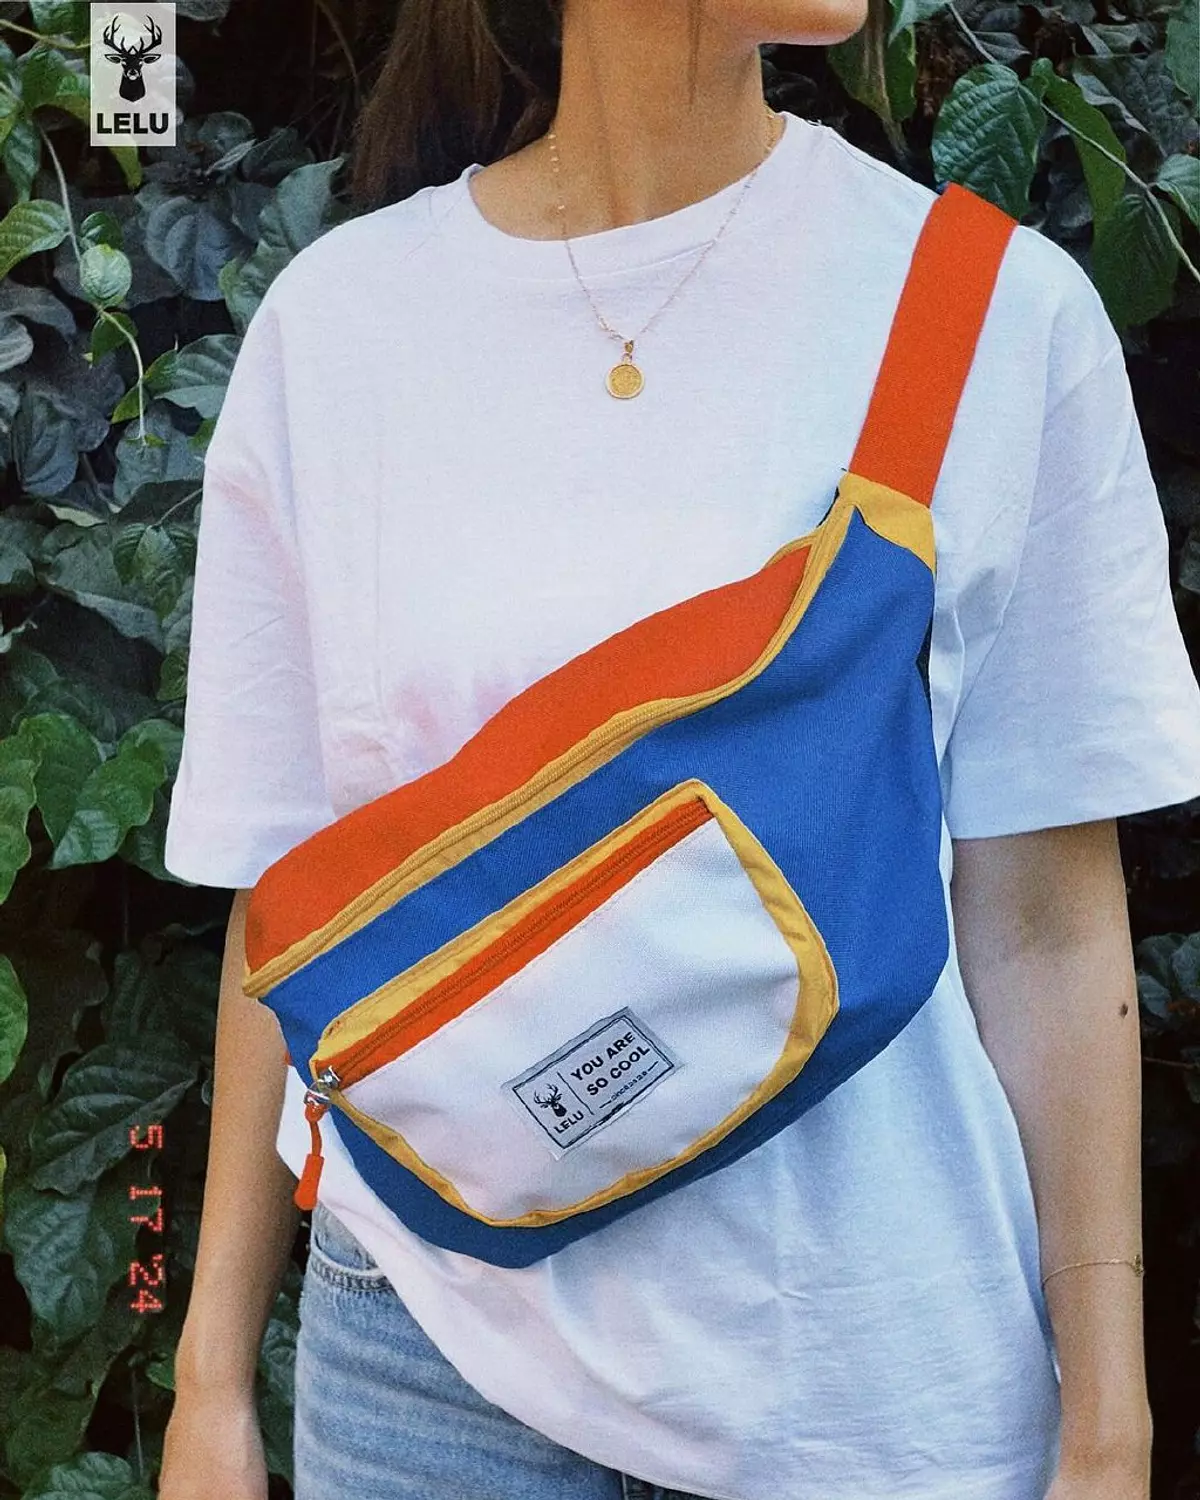 <h4 style="text-align: justify">Fanny Pack</h4>